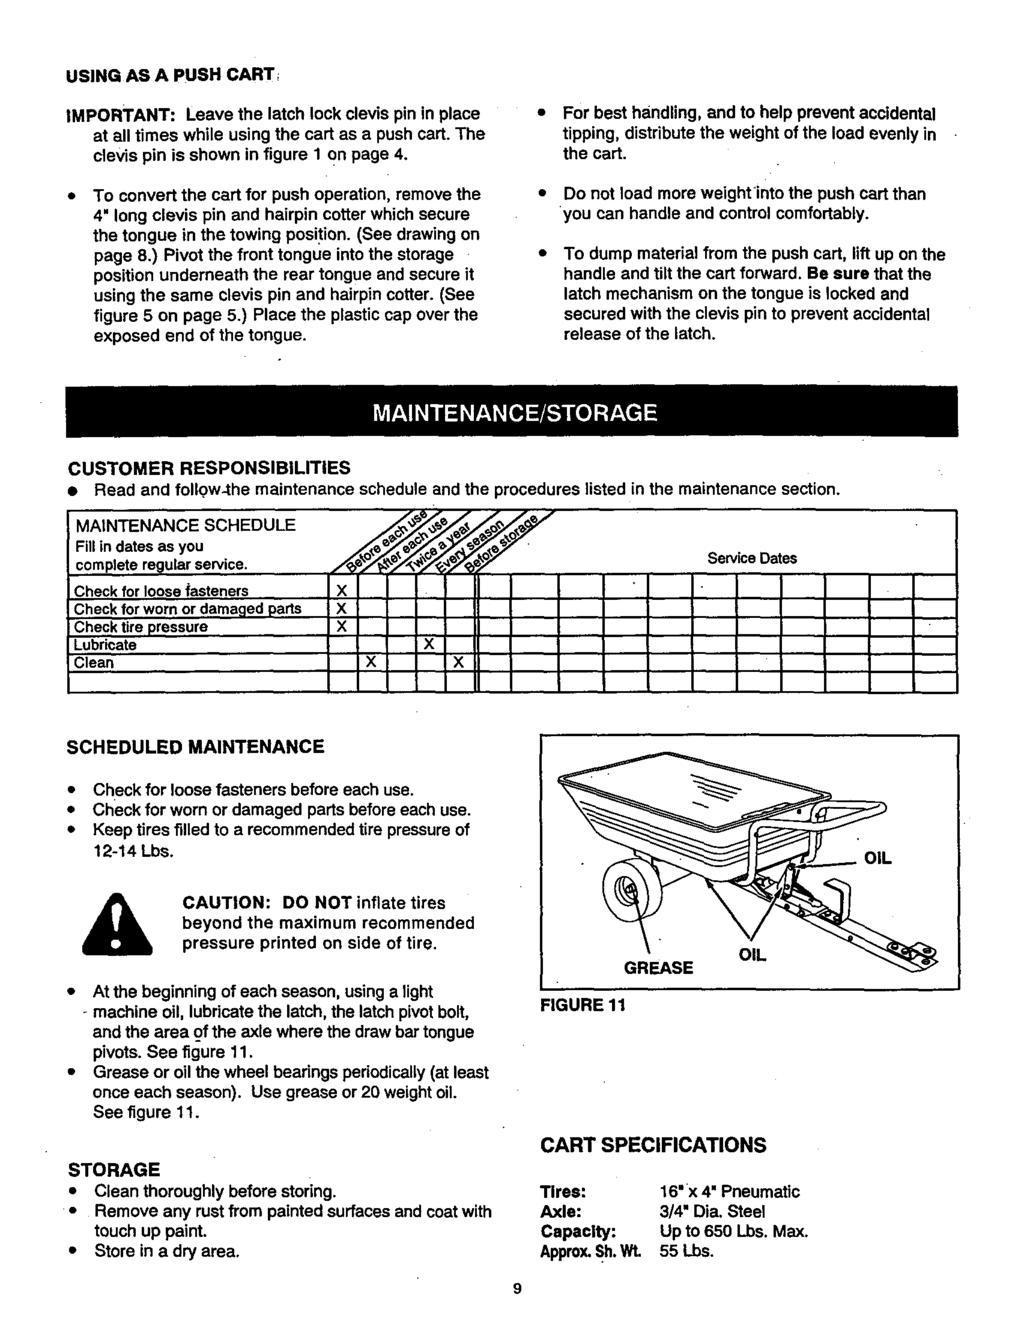 USING AS A PUSH CART_ IMPORTANT: Leave the latch lock clevis pin in place at all times while using the cart as a push cart. The clevis pin is shown in figure on page 4.